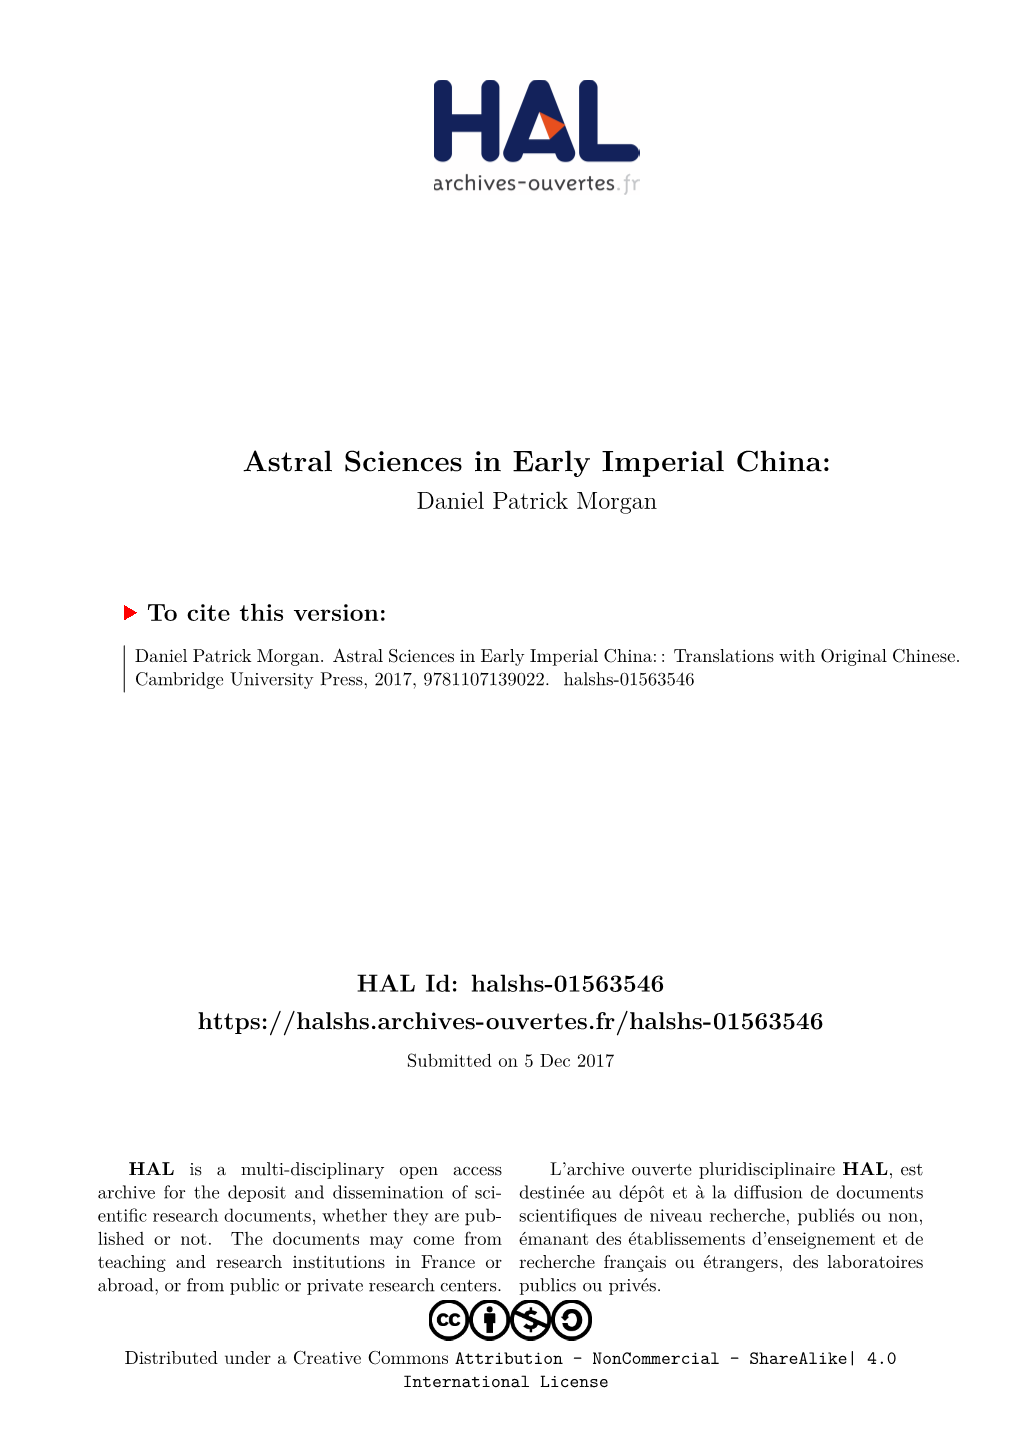 Astral Sciences in Early Imperial China: Daniel Patrick Morgan